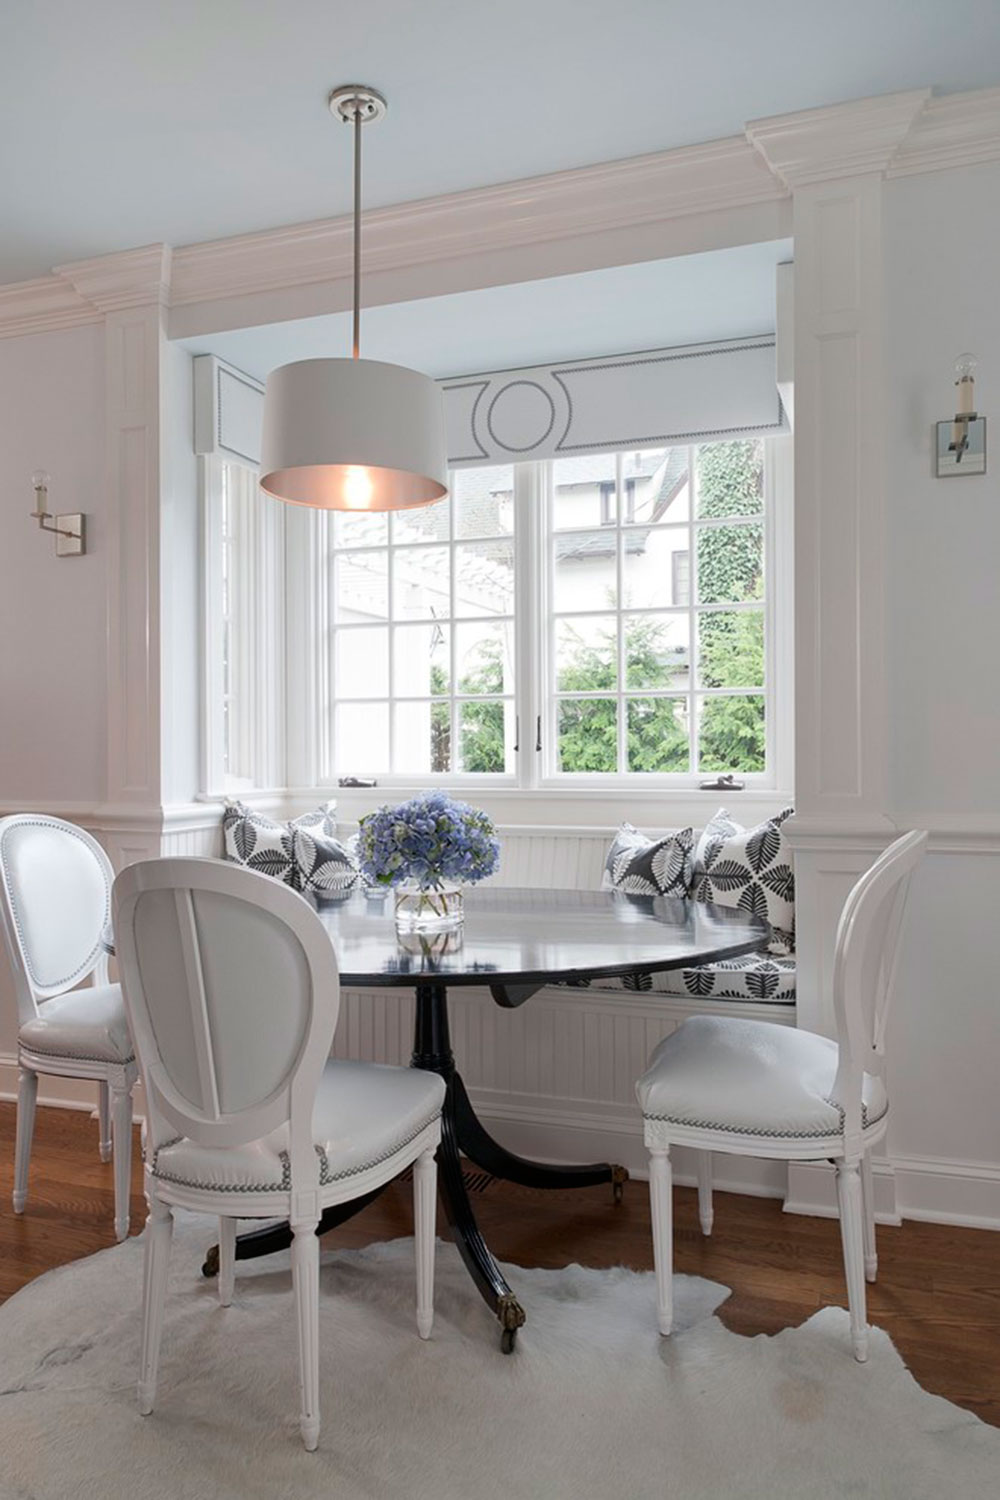 Breakfast-Nook-Design-Ideas-For-Awesome-Mornings9 Breakfast Nook Design Ideas For Awesome Mornings